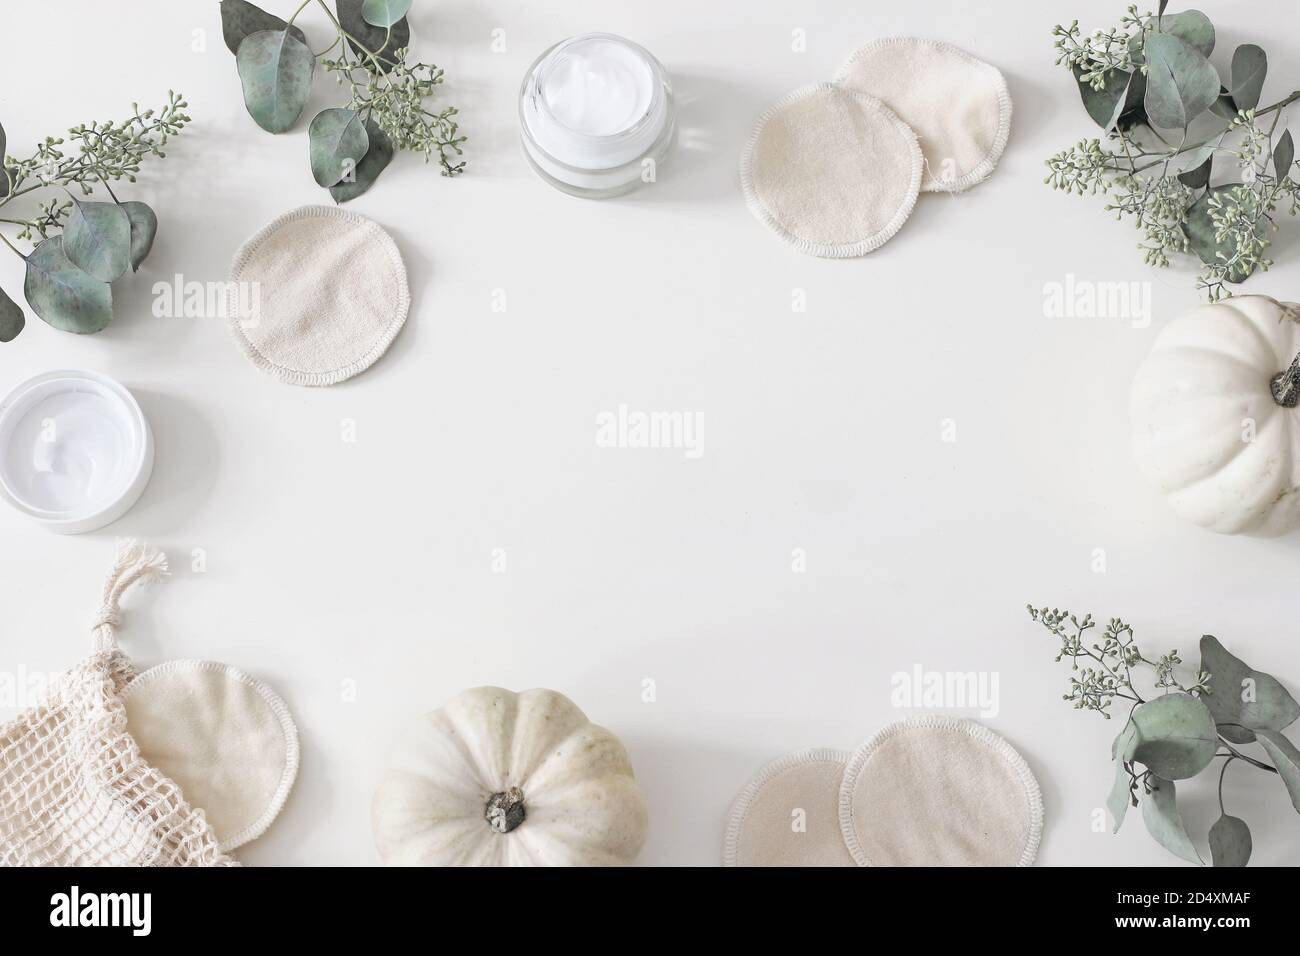 Decorative cosmetics frame. Organic cotton reusable round pads for make up removal. Eucalyptus branches, pumpkins.and moisturizer on white table Stock Photo